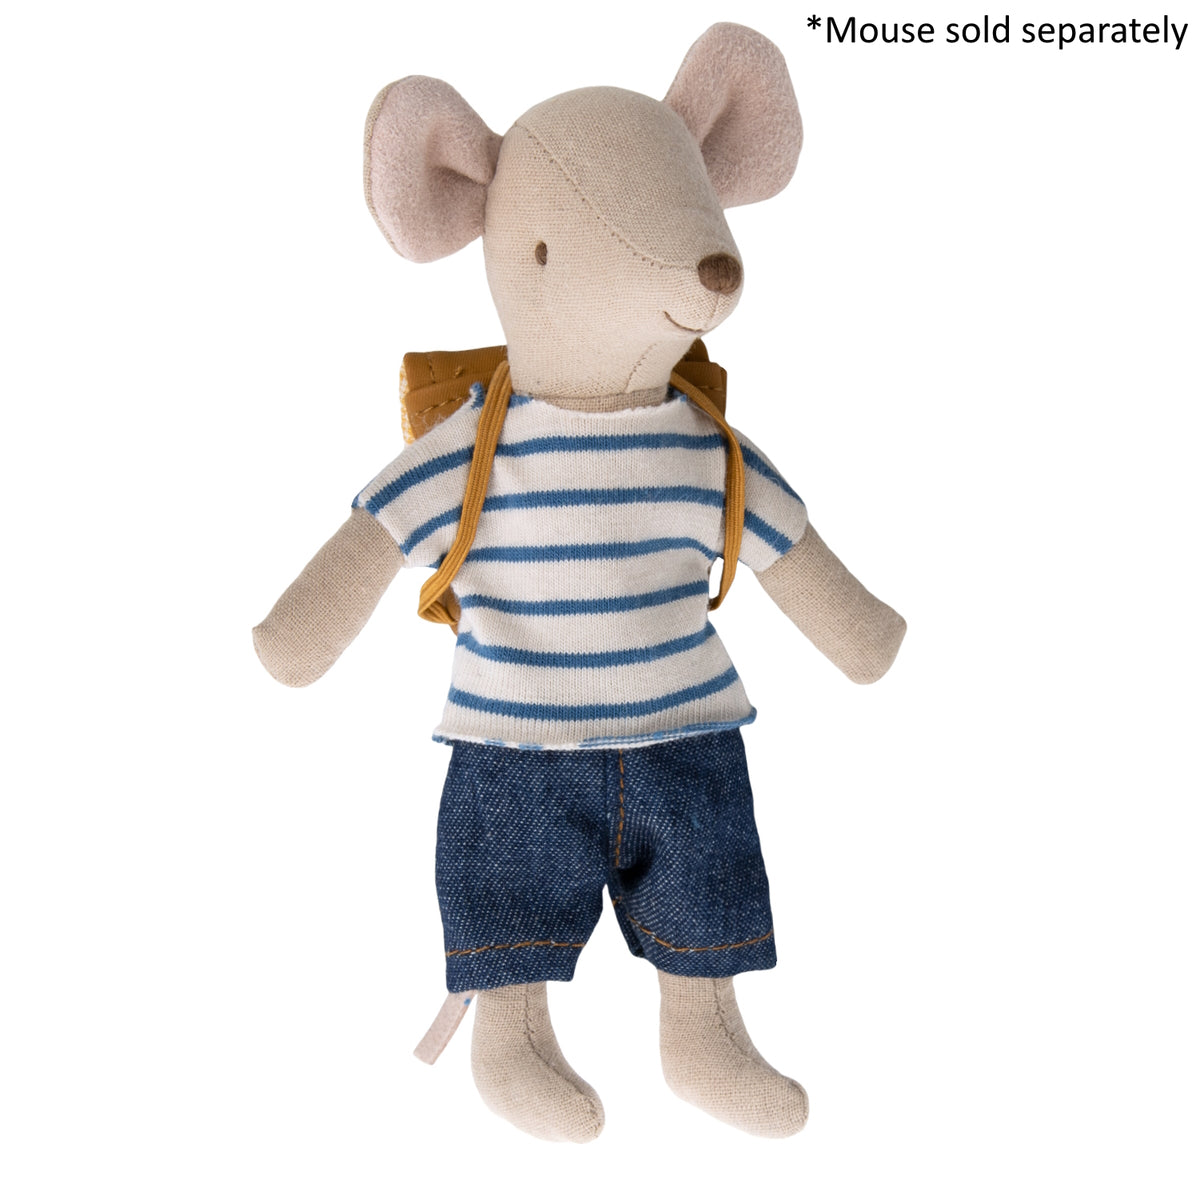 Clothes & Bag for Big Brother Mouse